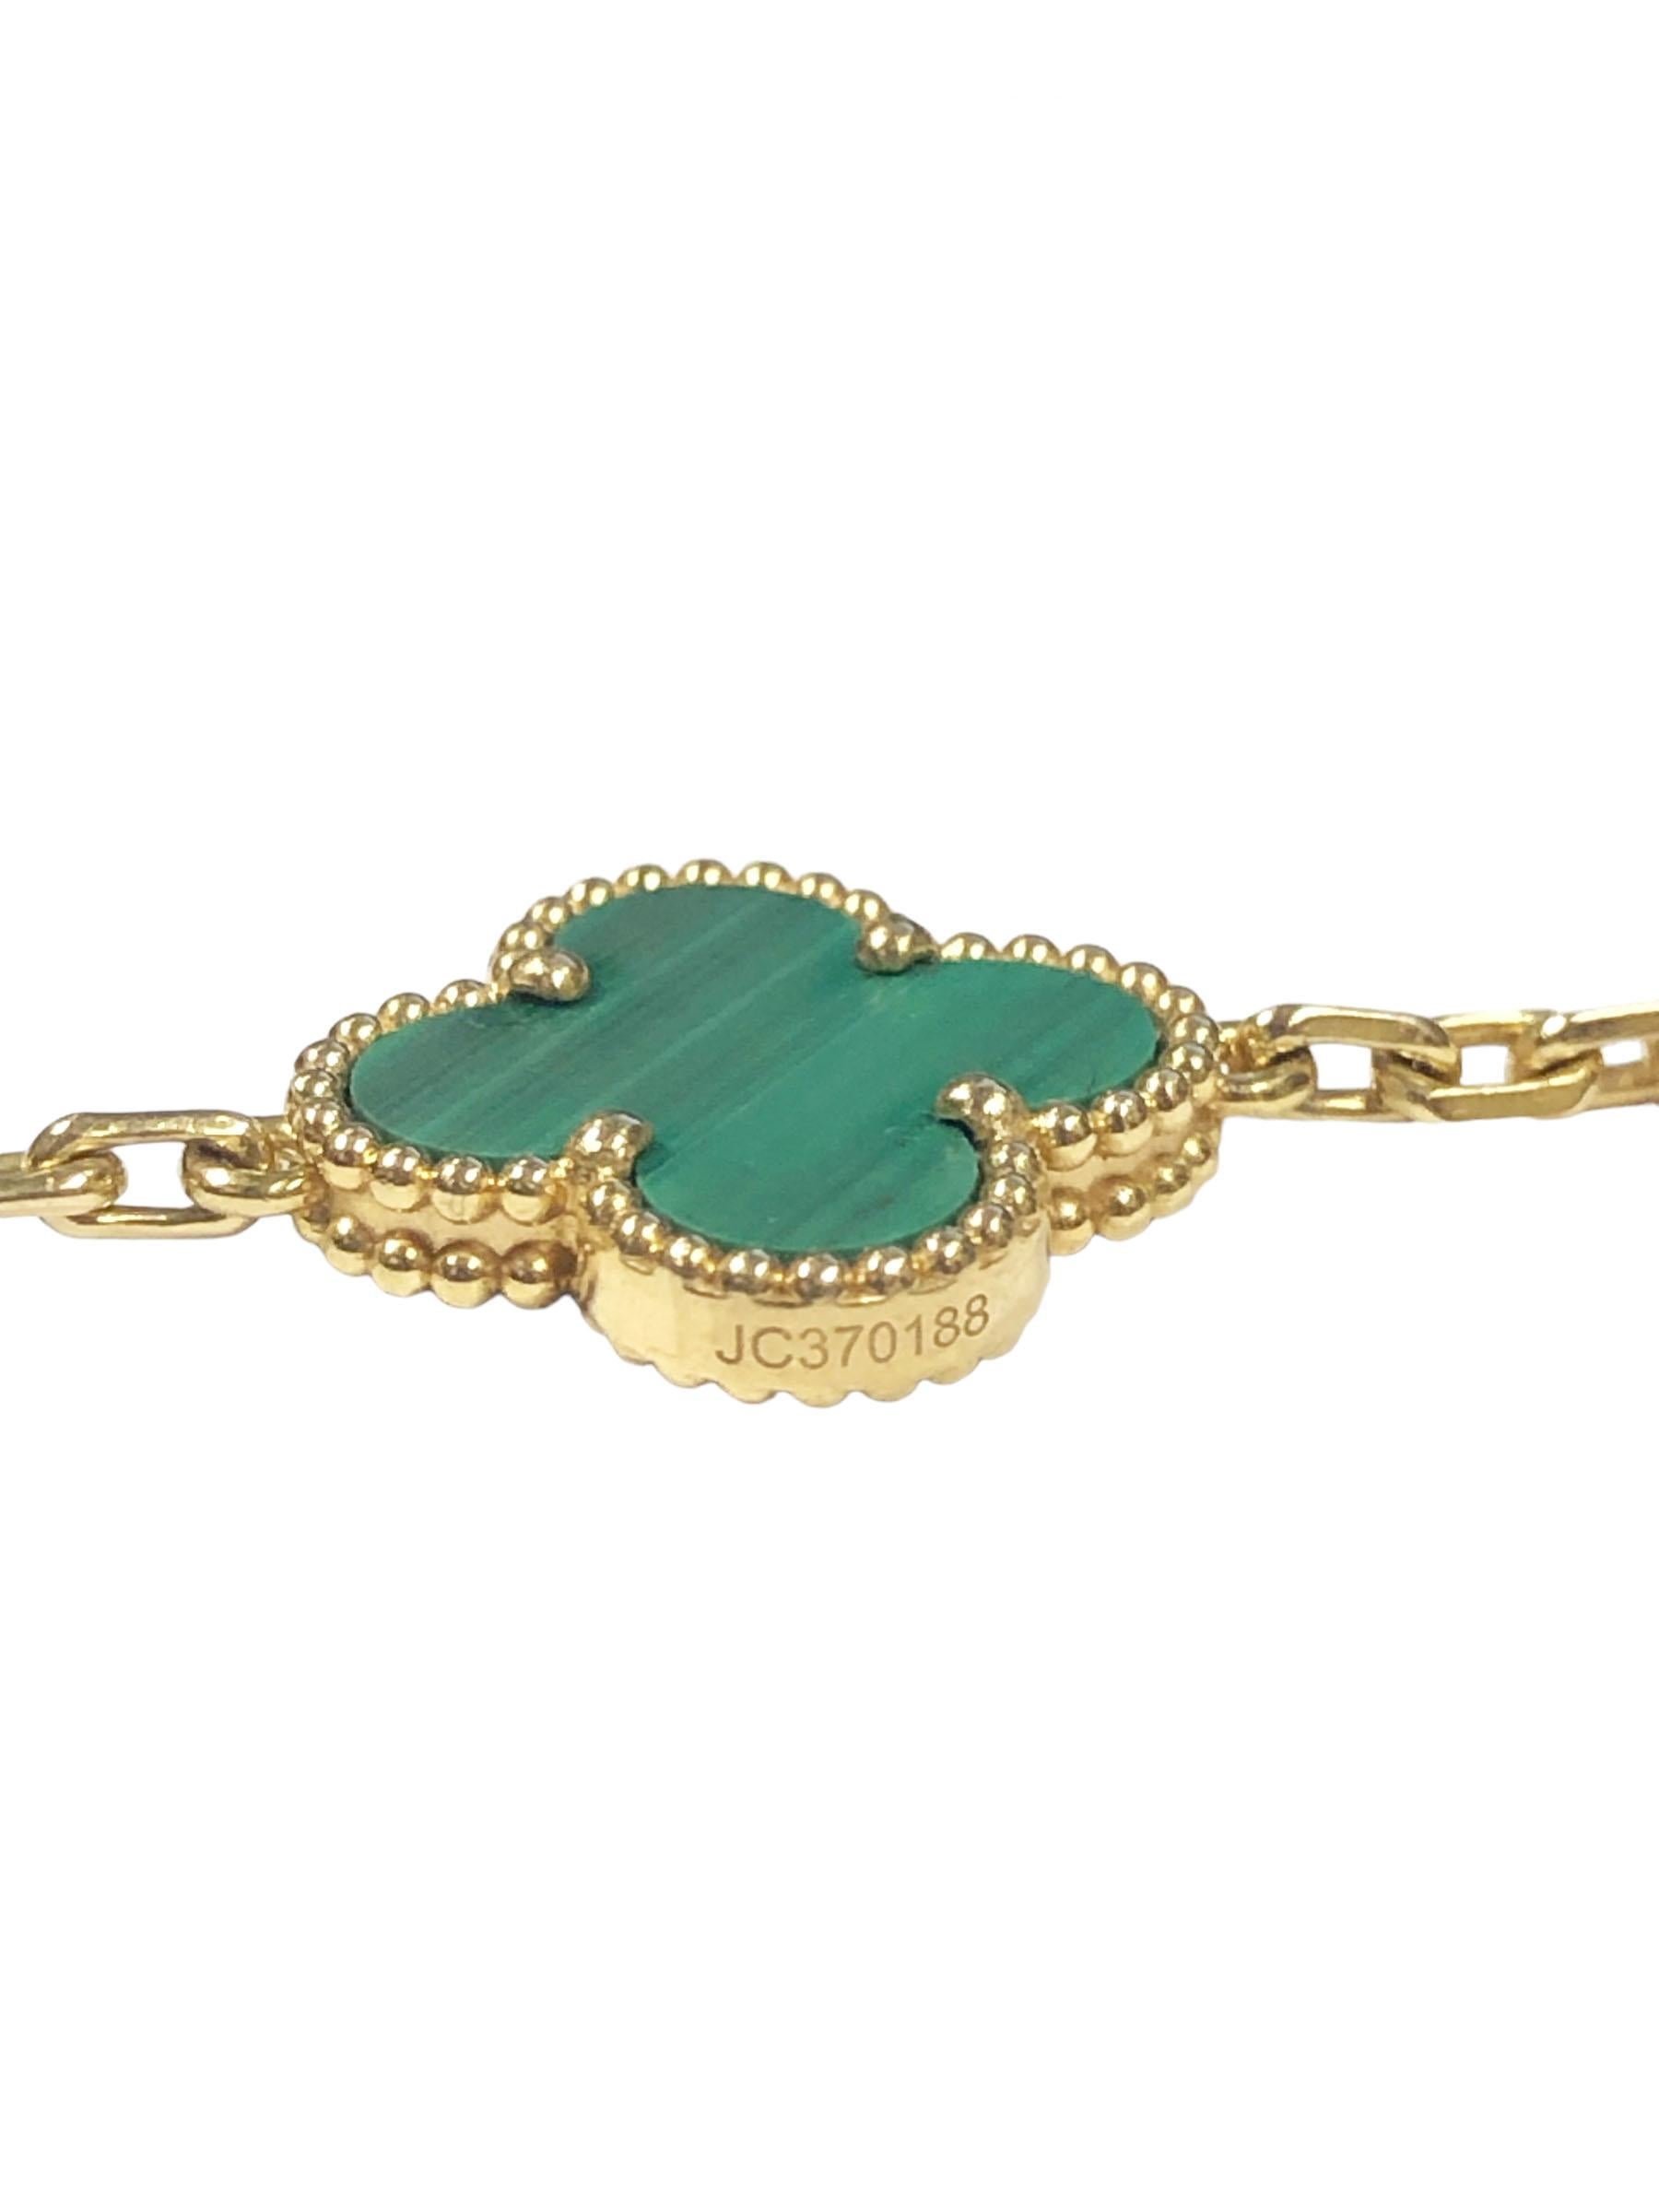 Circa 2021 Van Cleef & Arpels Alhambra Vintage 18k Yellow Gold and Malachite 5 Station Bracelet, each station measuring 9/16 X 9/16 inch and 7 3/8 inches in length. This is complete with Presentation box, outer box, certificate and booklet.